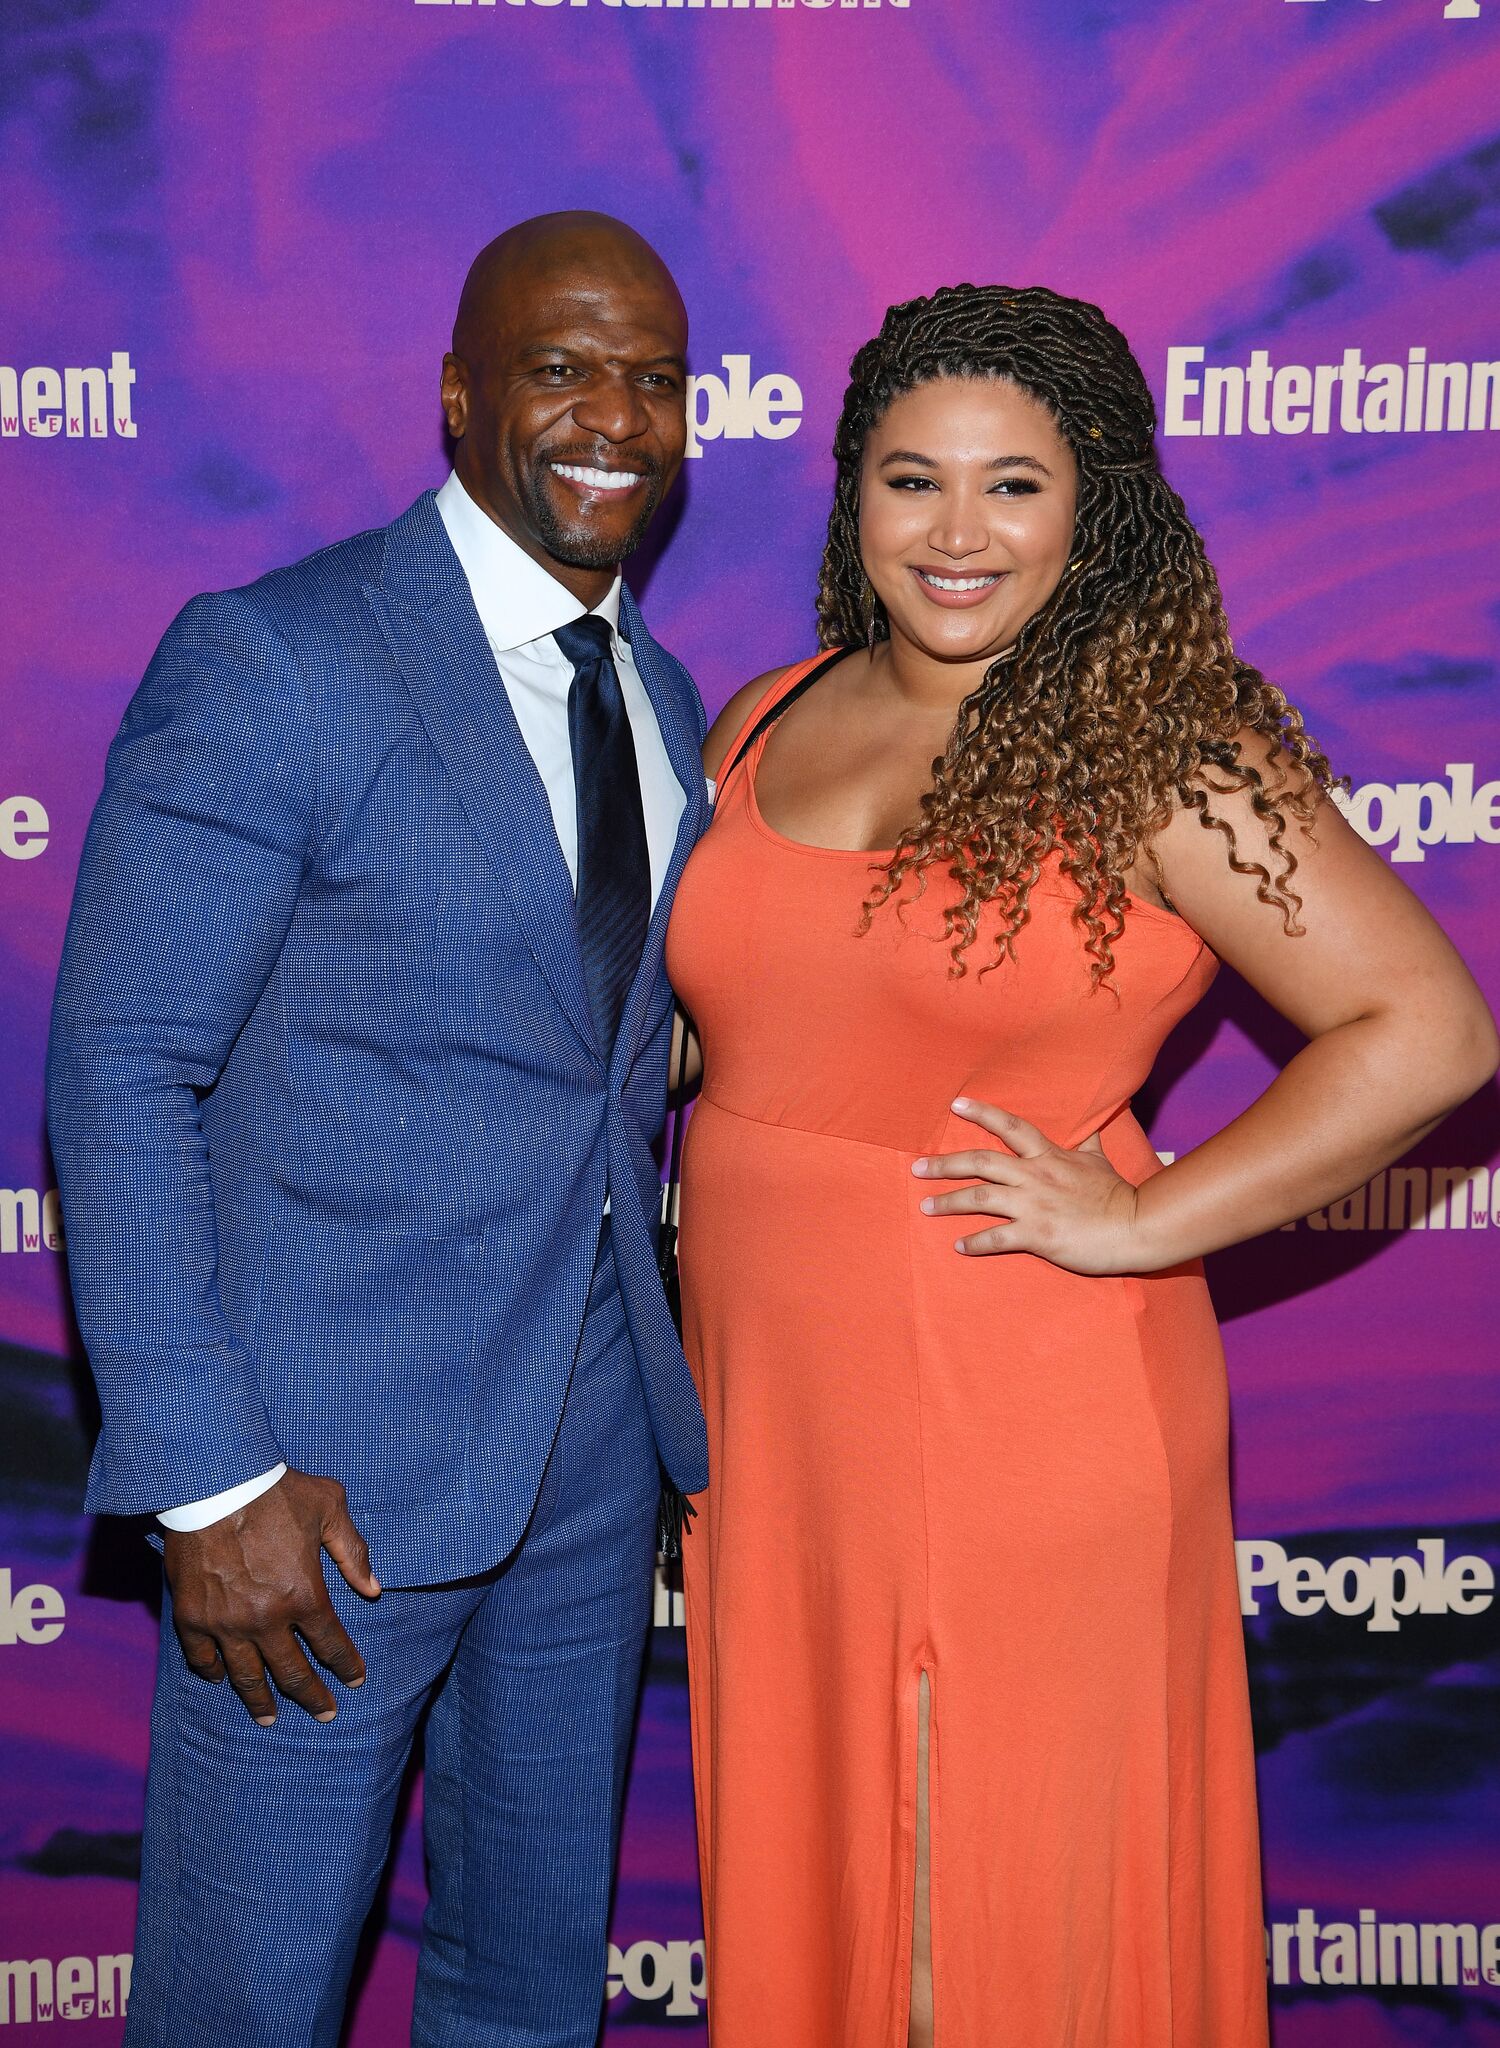 Terry Crews and Azriel Crews attend the Entertainment Weekly & PEOPLE New York Upfronts Party on May 13, 2019 in New York City. | Getty Images